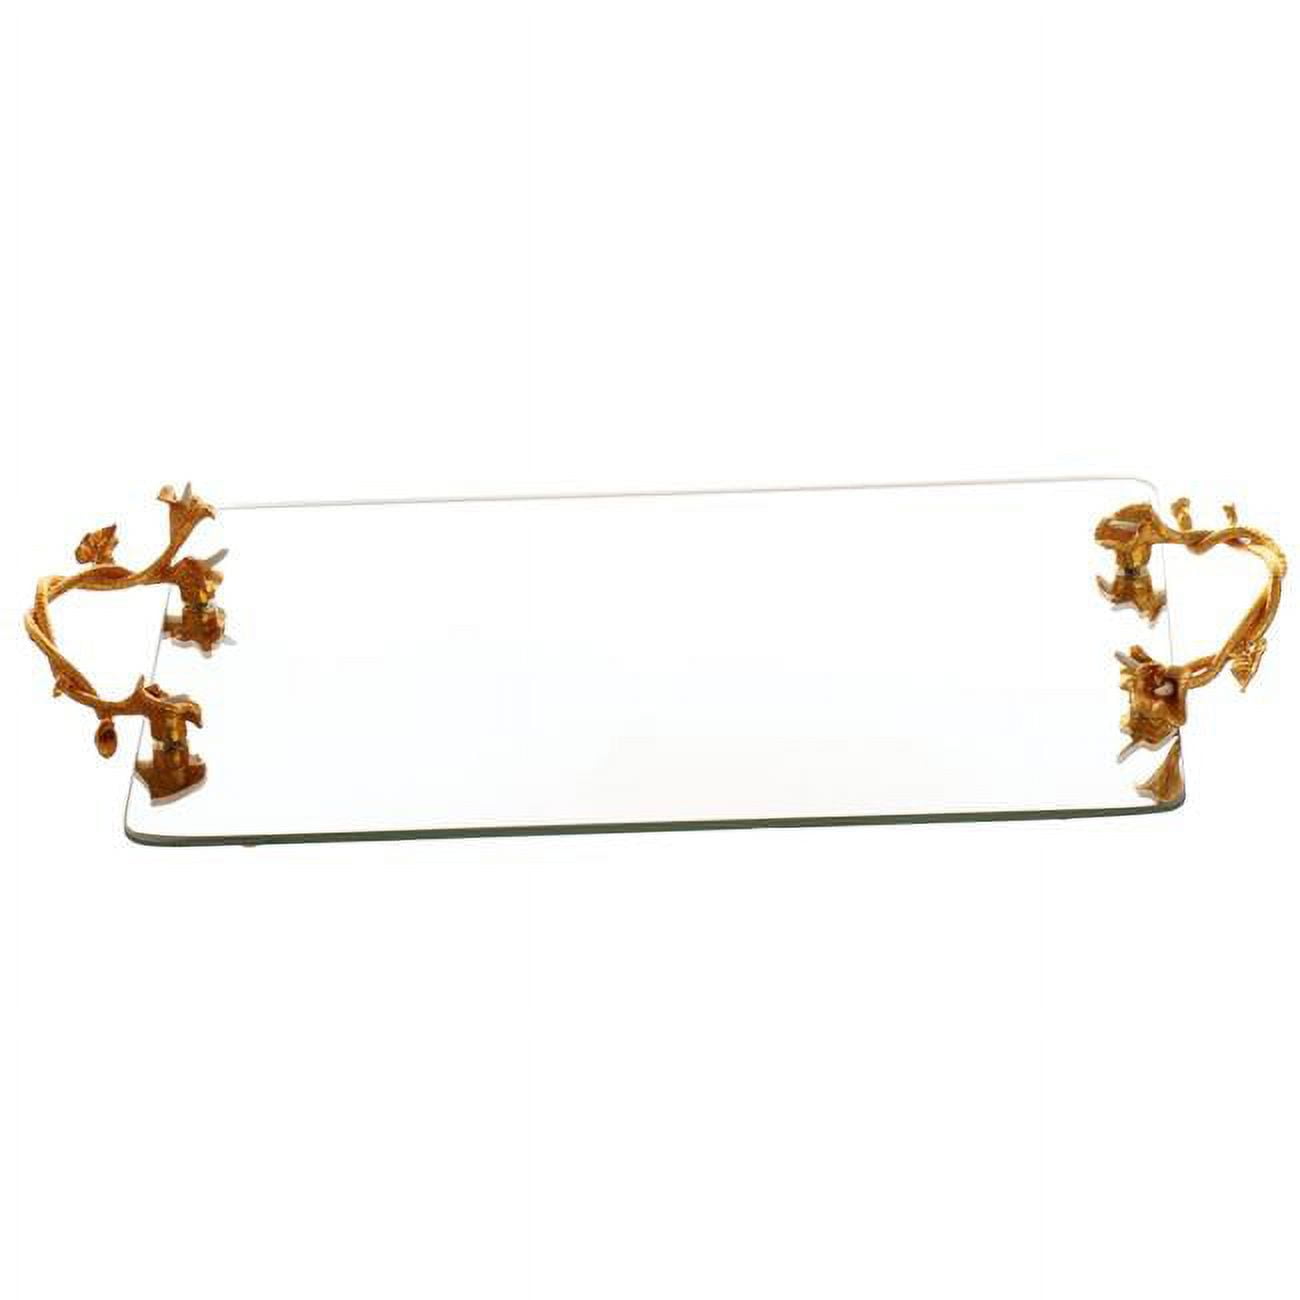 Picture of Brilliant Gifts 2002.224.59 20 x 10.5 in. Oblong Mirror Tray with Gold Handles, Large